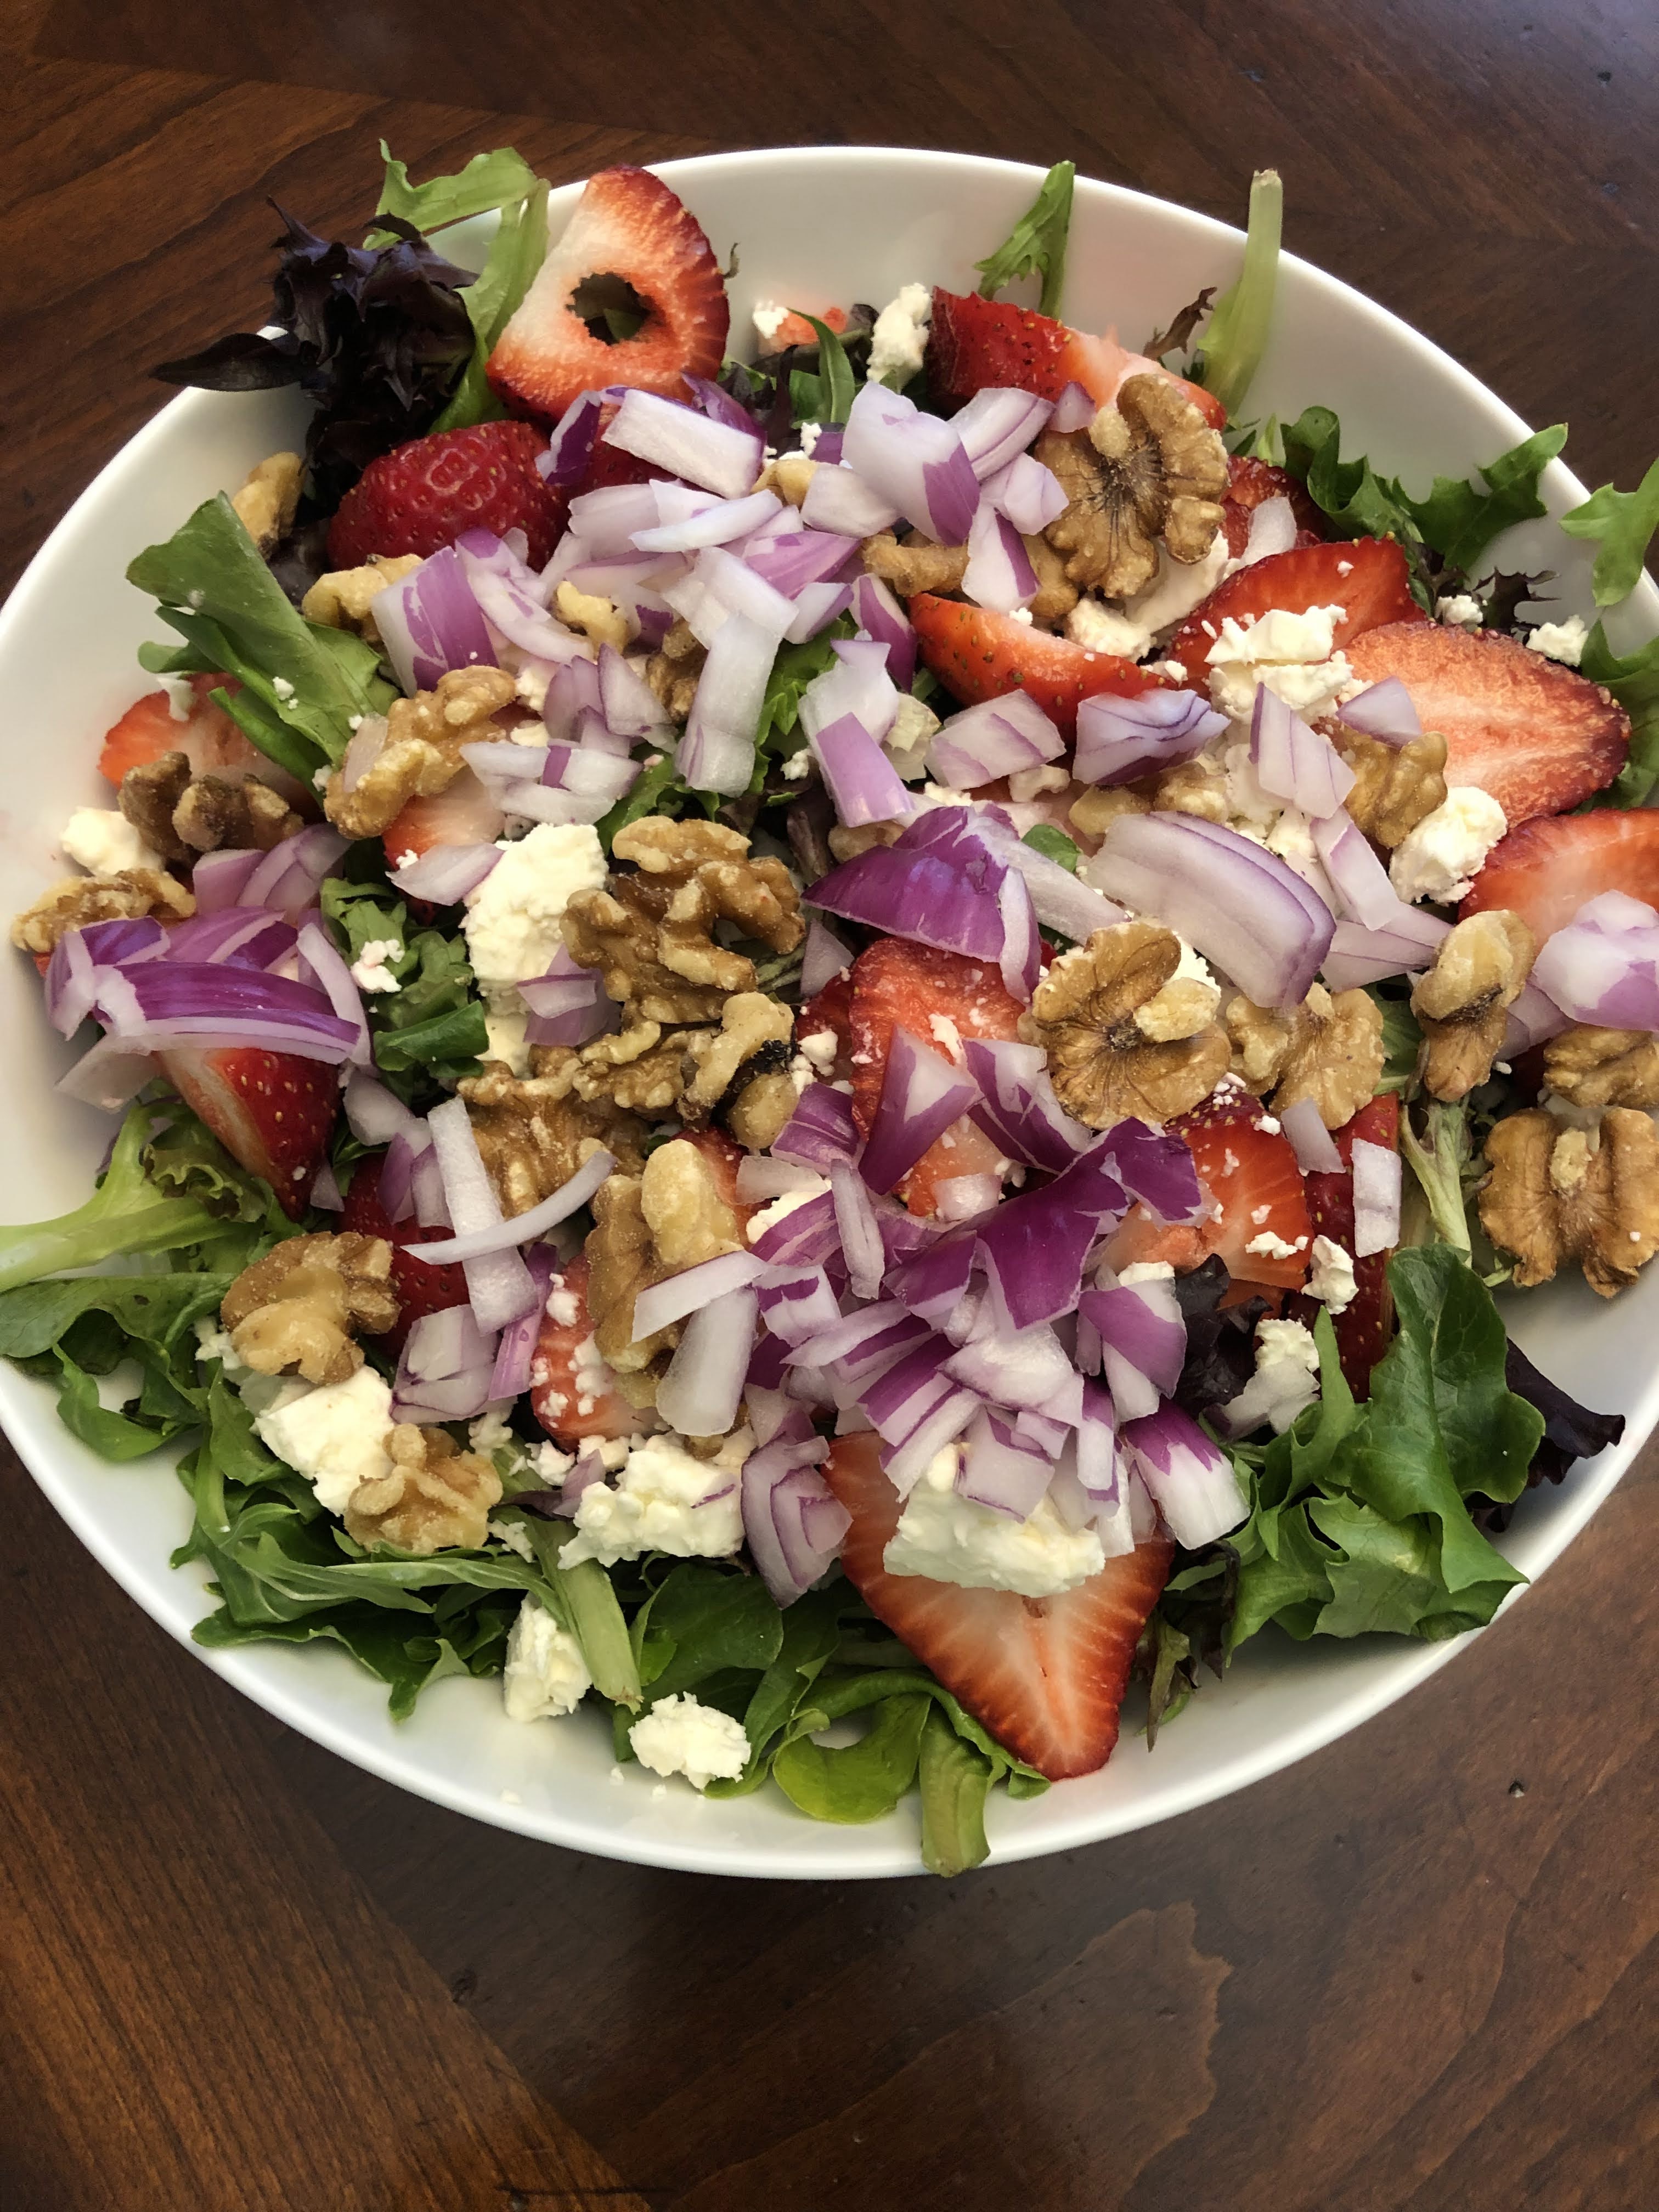 Strawberry salad with feta cheese and walnuts